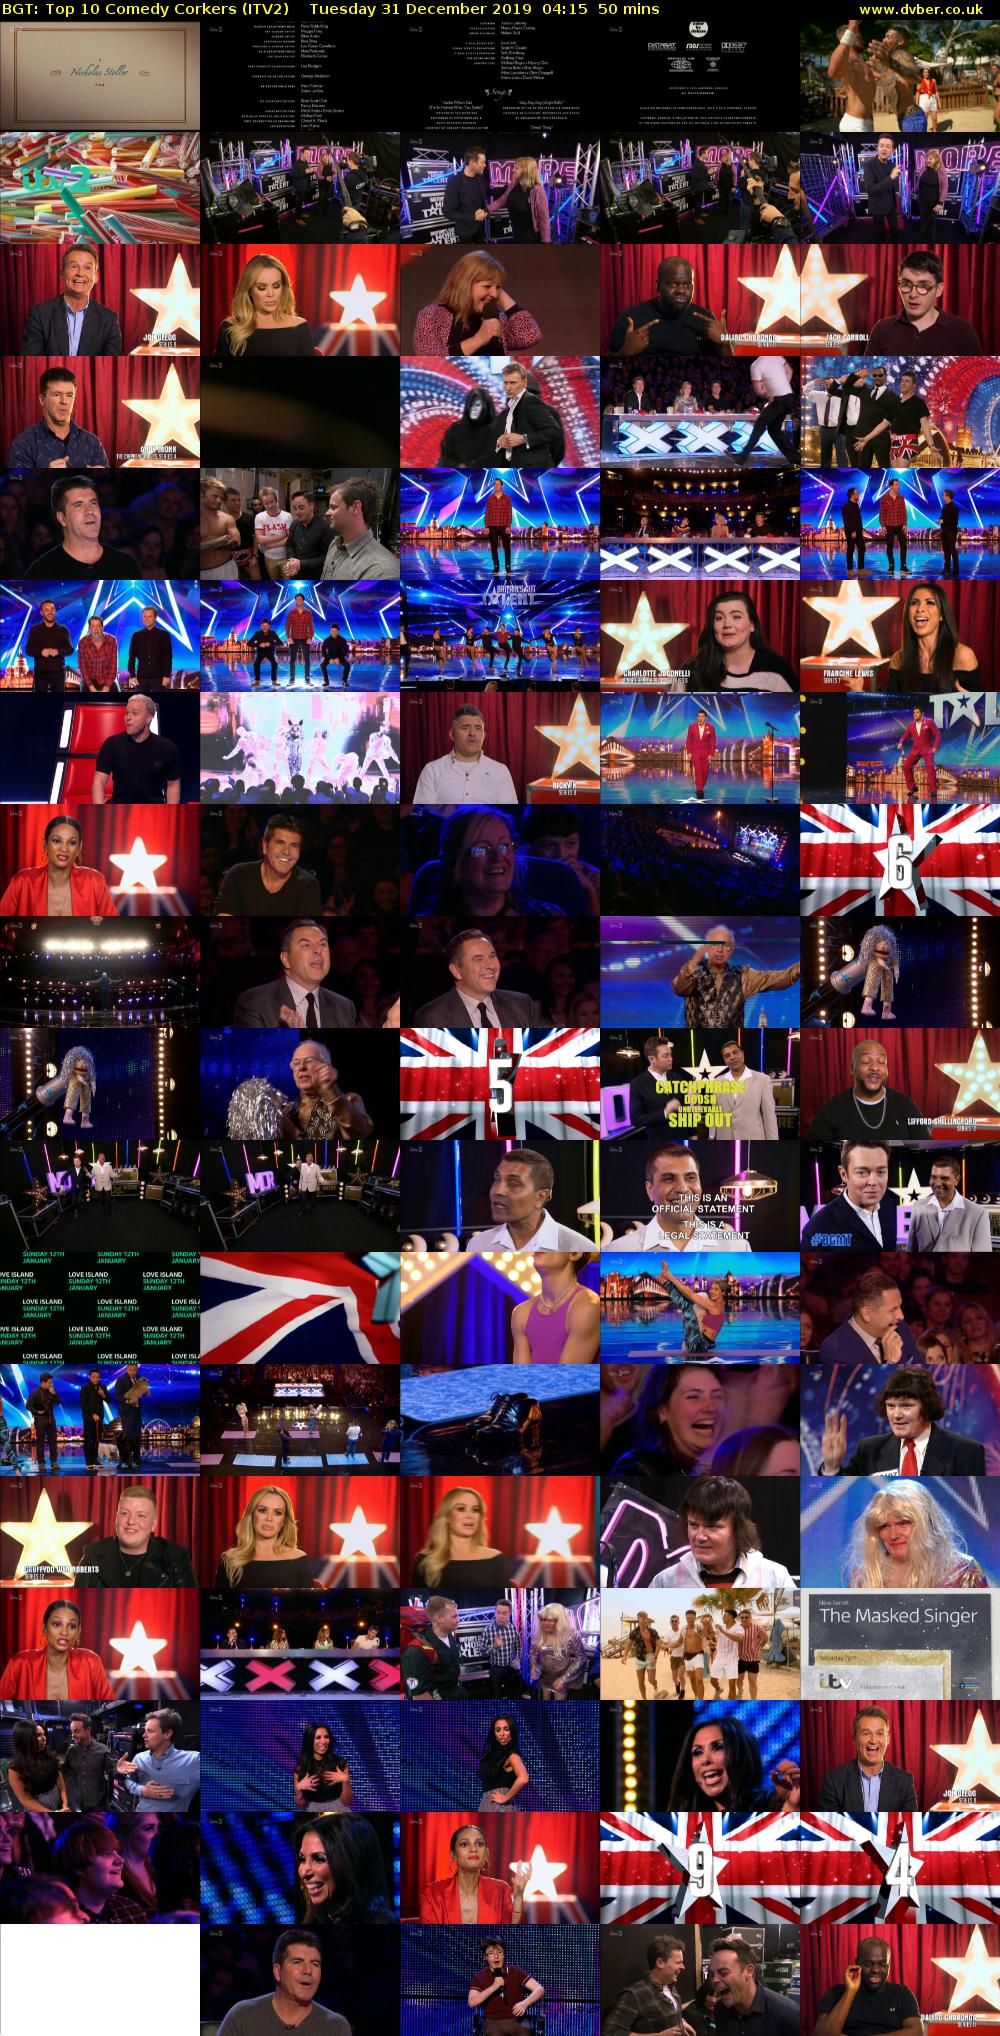 BGT: Top 10 Comedy Corkers (ITV2) Tuesday 31 December 2019 04:15 - 05:05